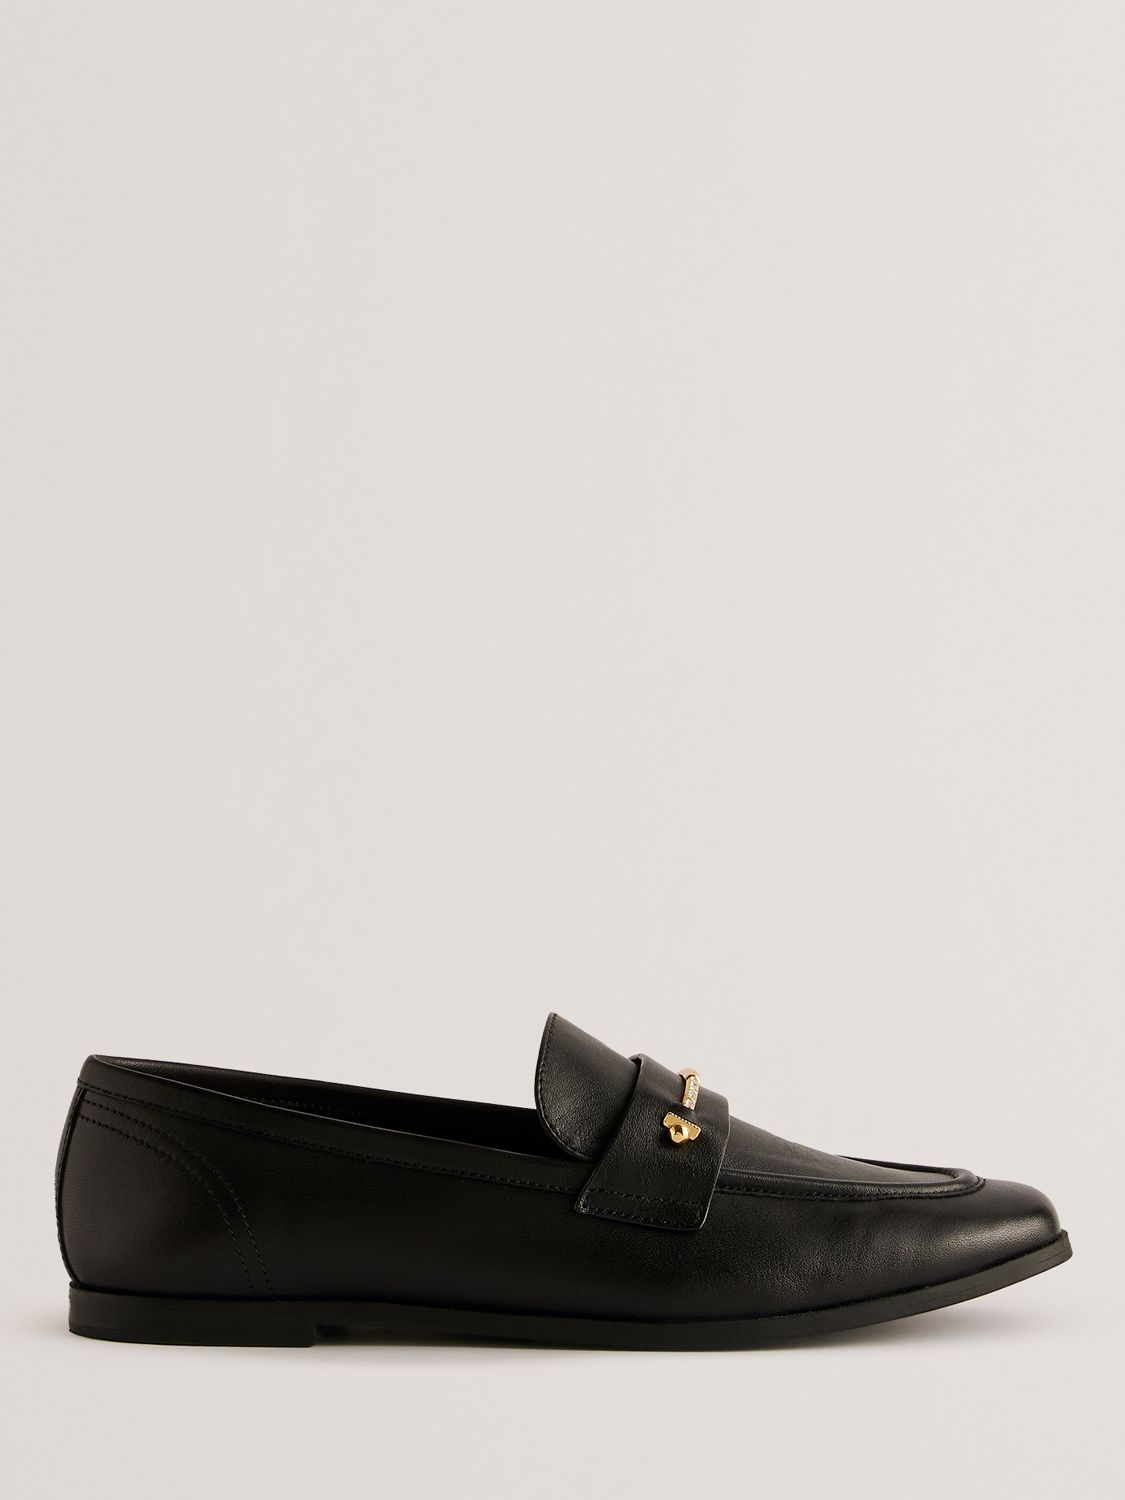 Ted Baker Zzoee Flat Leather Loafers, Black, EU37